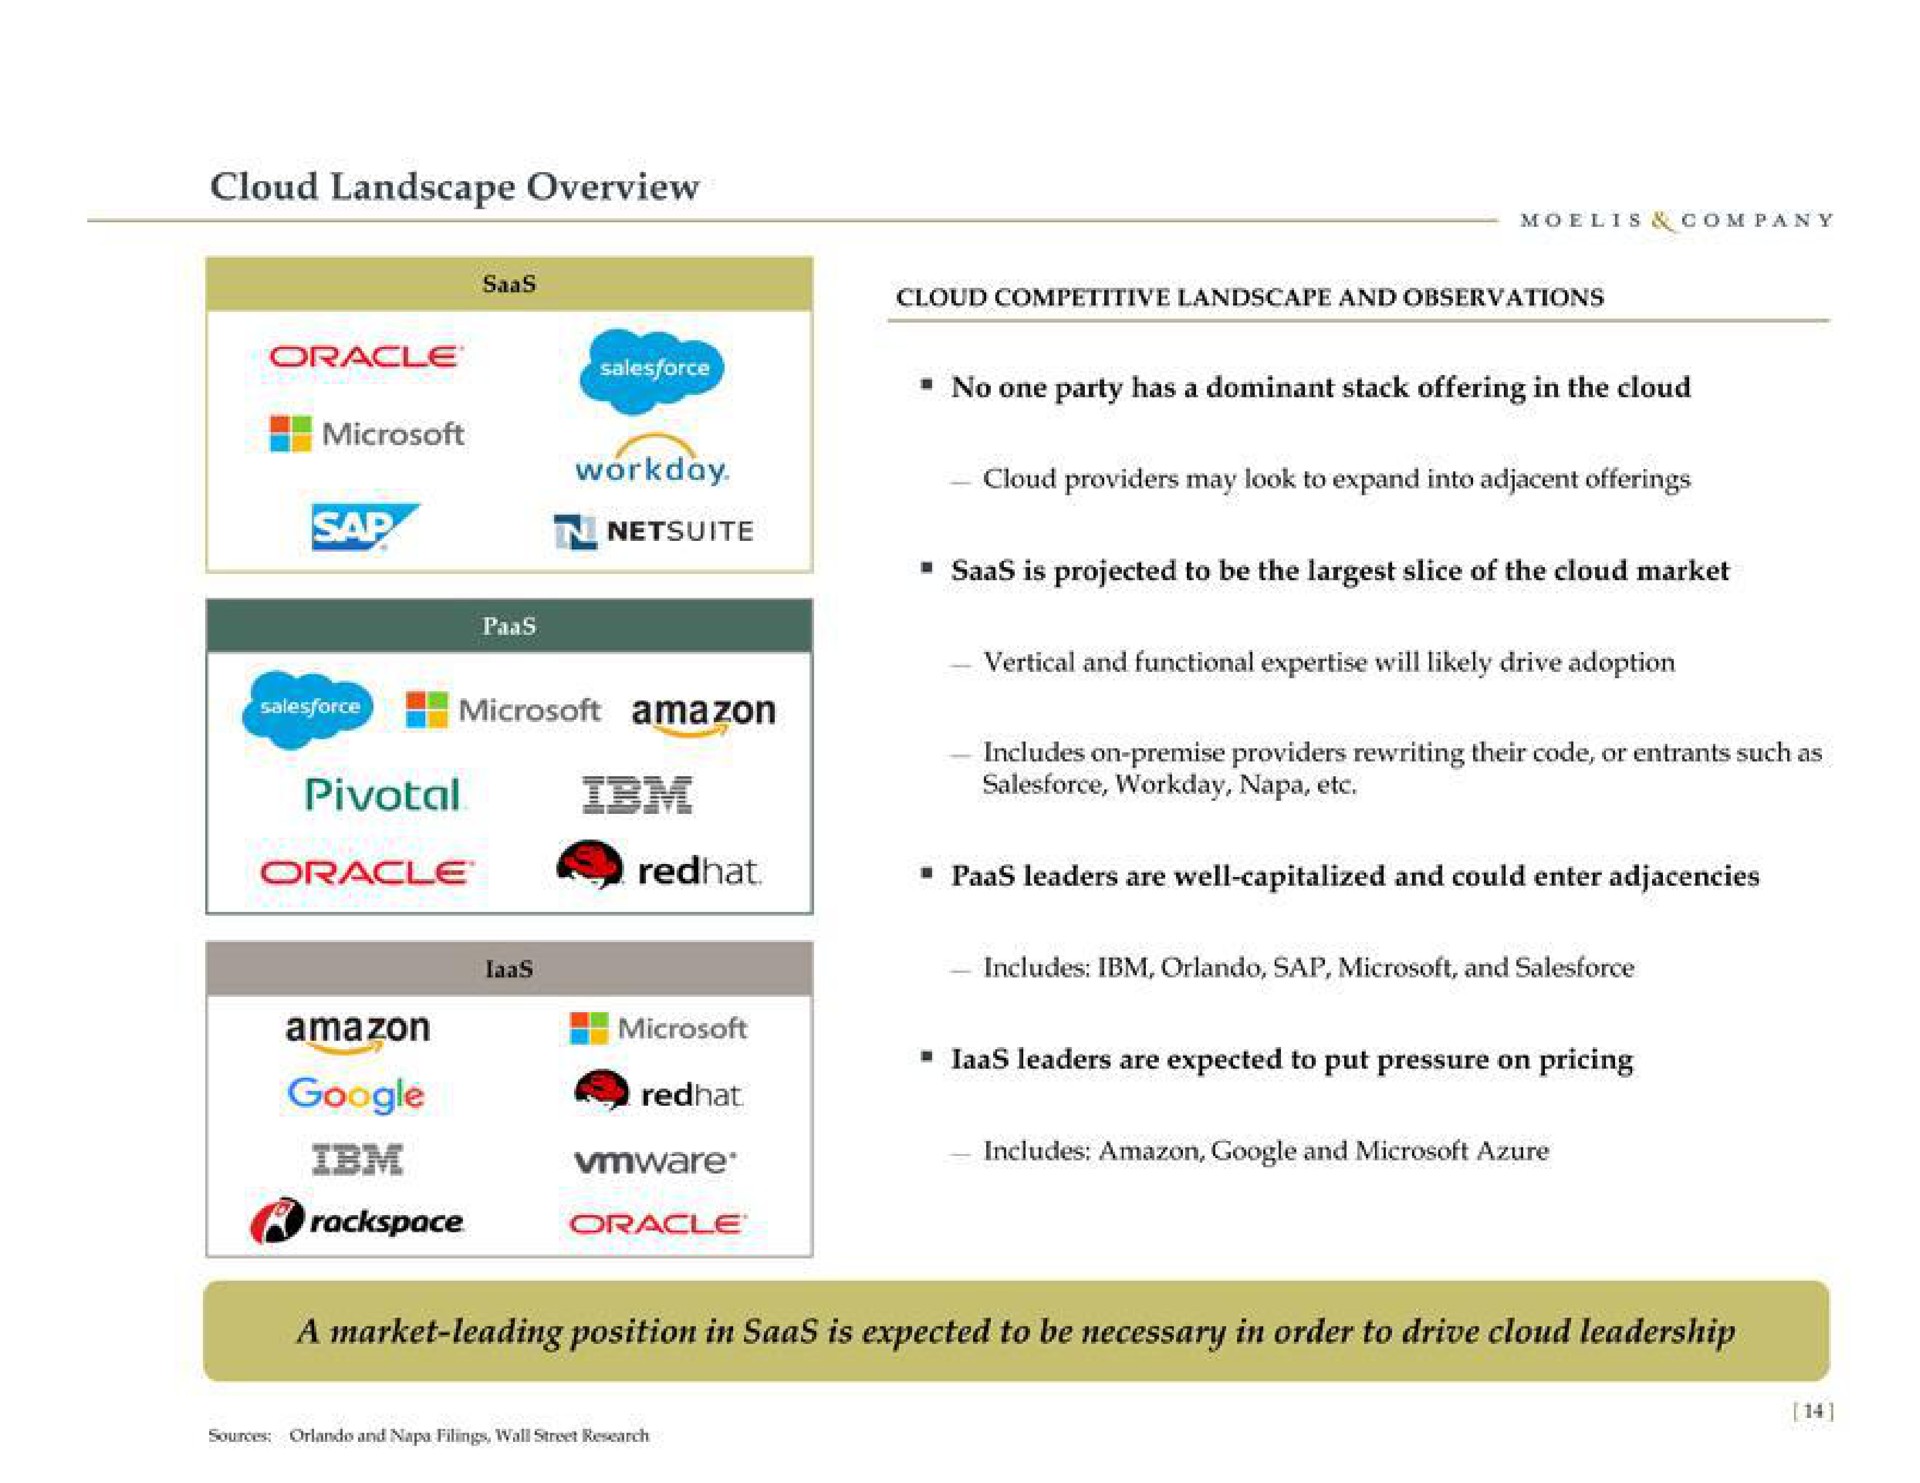 cloud landscape overview oracle sap pivotal is no one party has a dominant stack offering in the cloud is projected to be the slice of the cloud market oracle leaders are well capitalized and could enter adjacencies includes sap and leaders are expected to put pressure on pricing | Moelis & Company